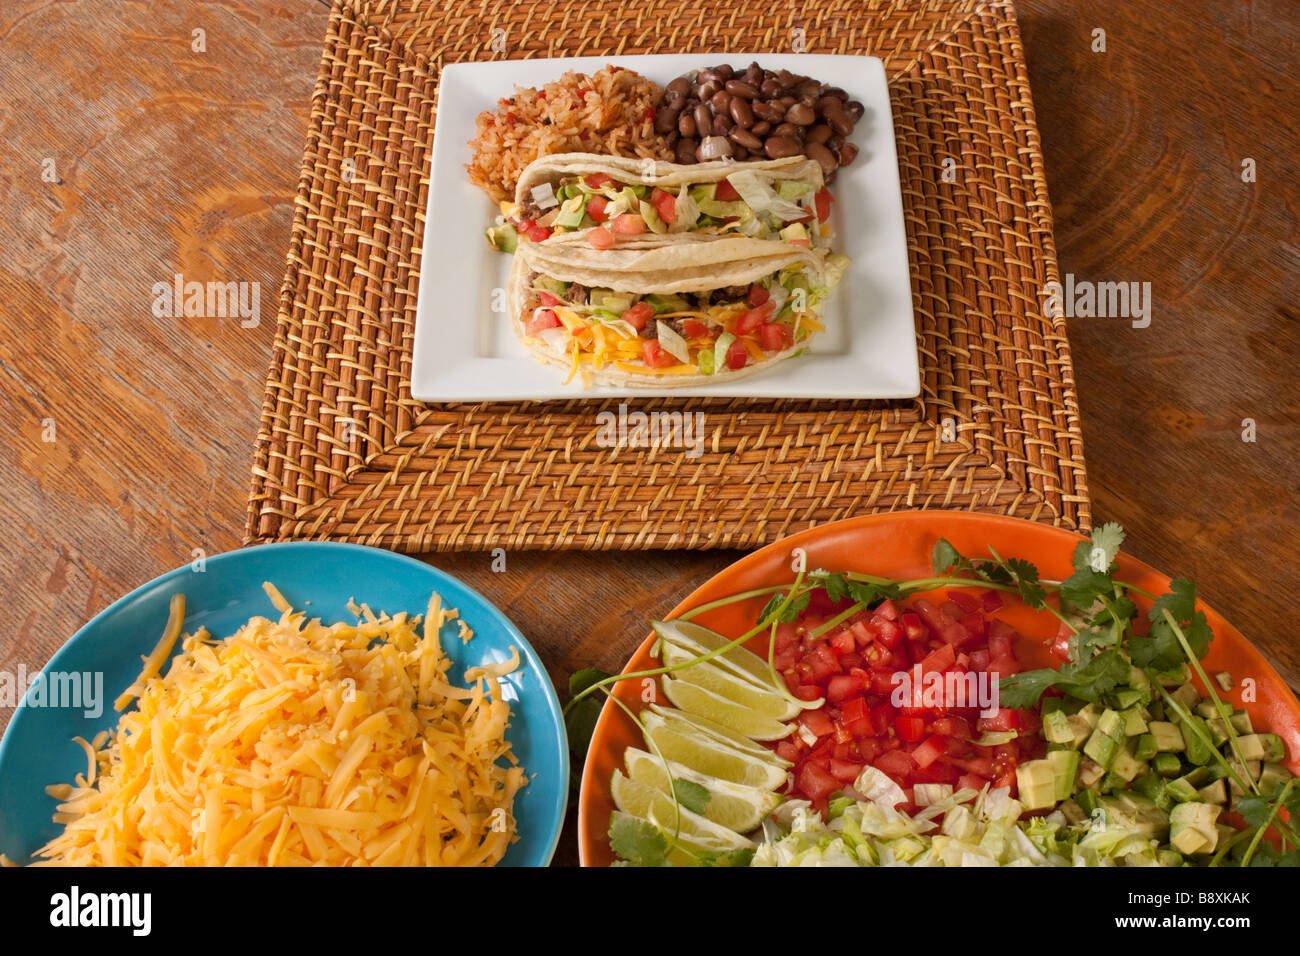 A plate of tacos rice and beans on a bamboo charger with taco ingredients on separate platters Stock Photo